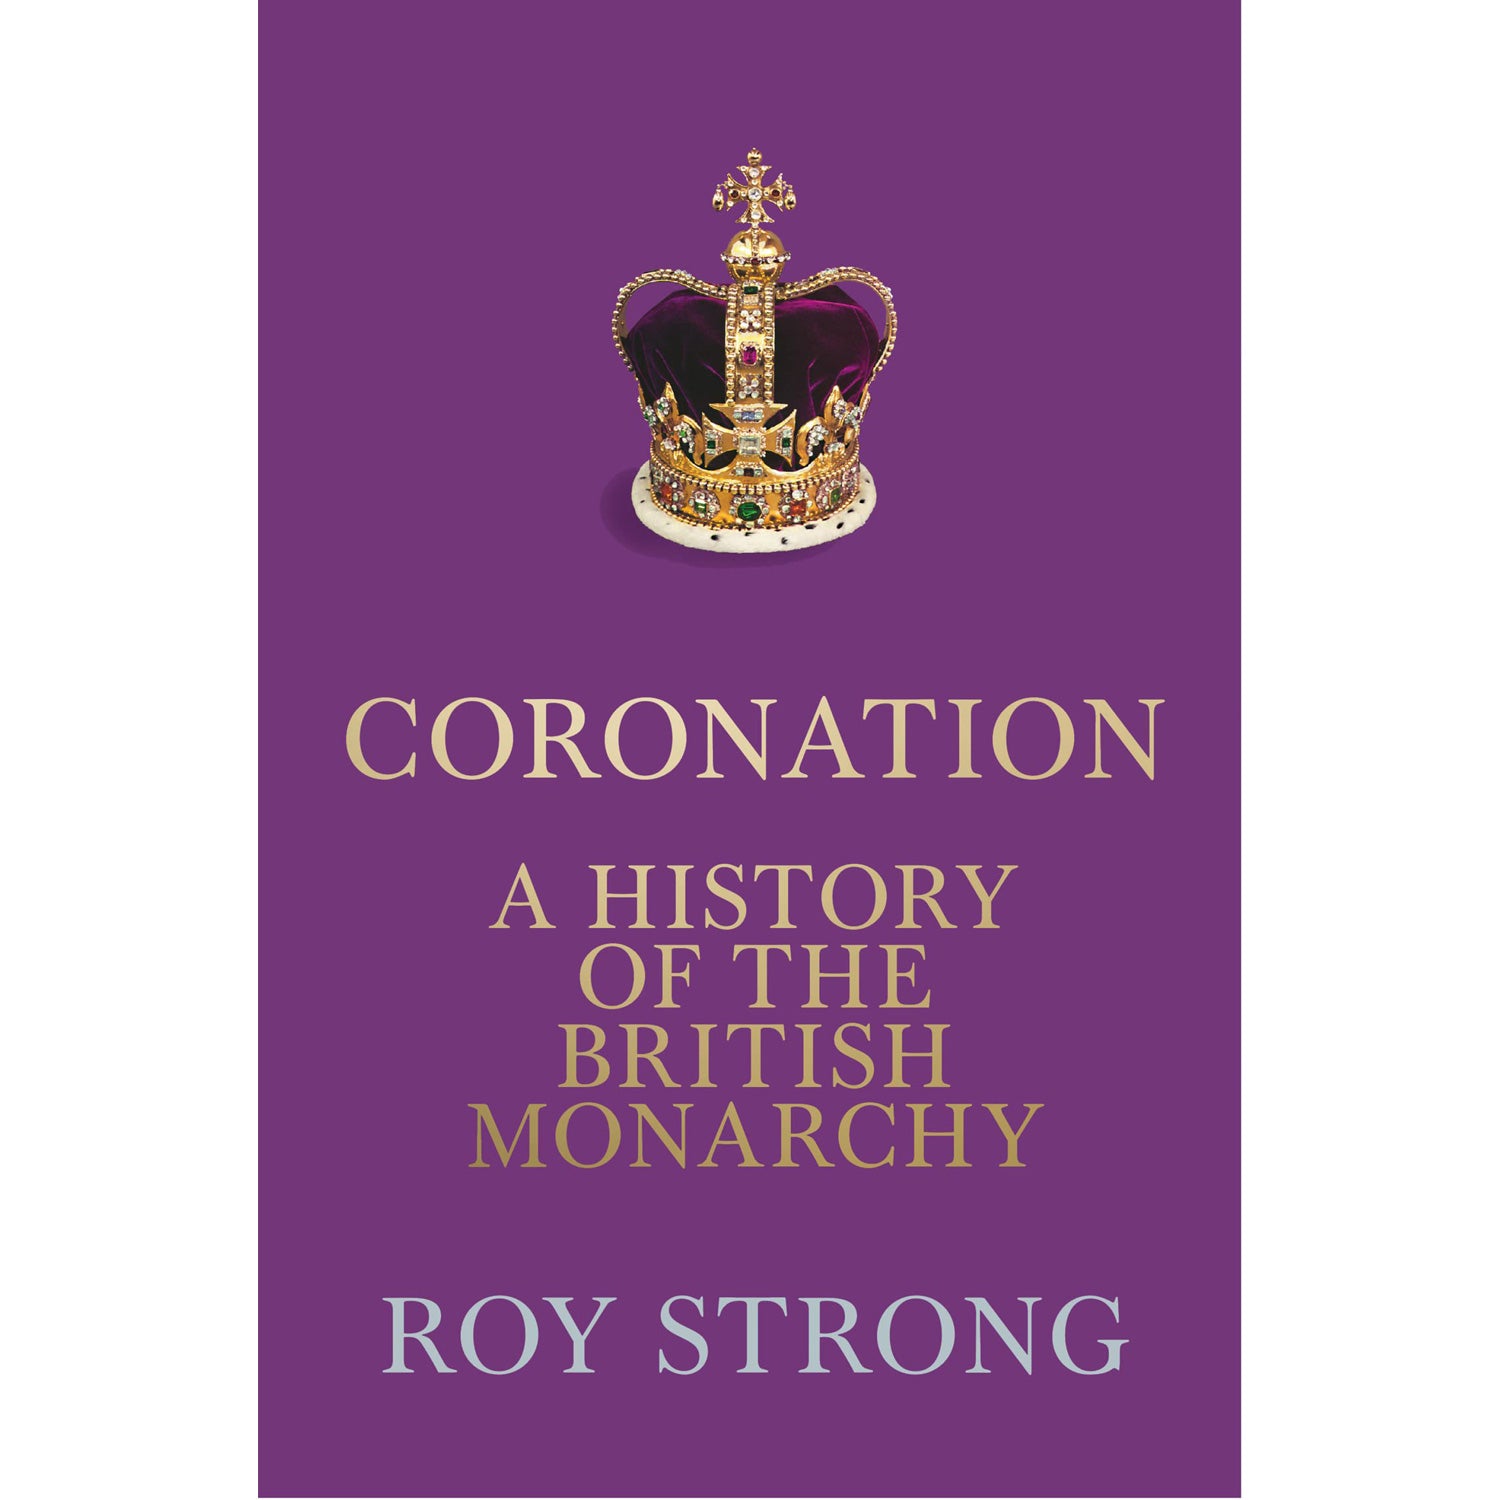 Coronation - A History Of The British Monarchy Book by Roy Strong 1